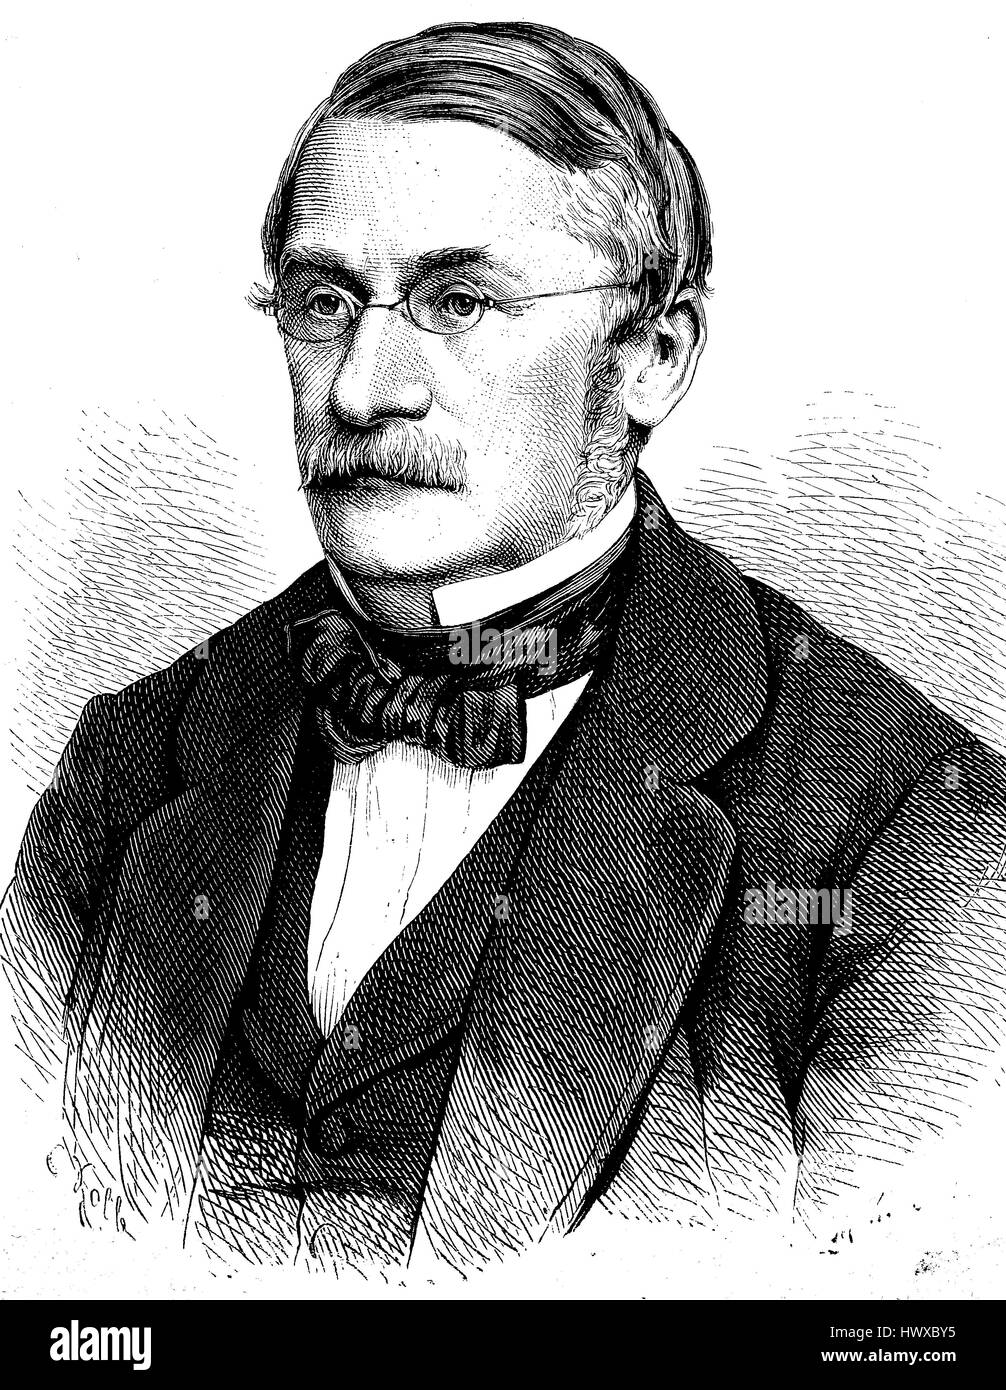 Hans Victor von Unruh, March 28, 1806 - February 4, 1886, was a Prussian civil servant and politician, President of the Prussian National Assembly of 1848 and Member of the Reichstag of the German Empire, Germany, reproduction of an image, woodcut from the year 1881, digital improved Stock Photo